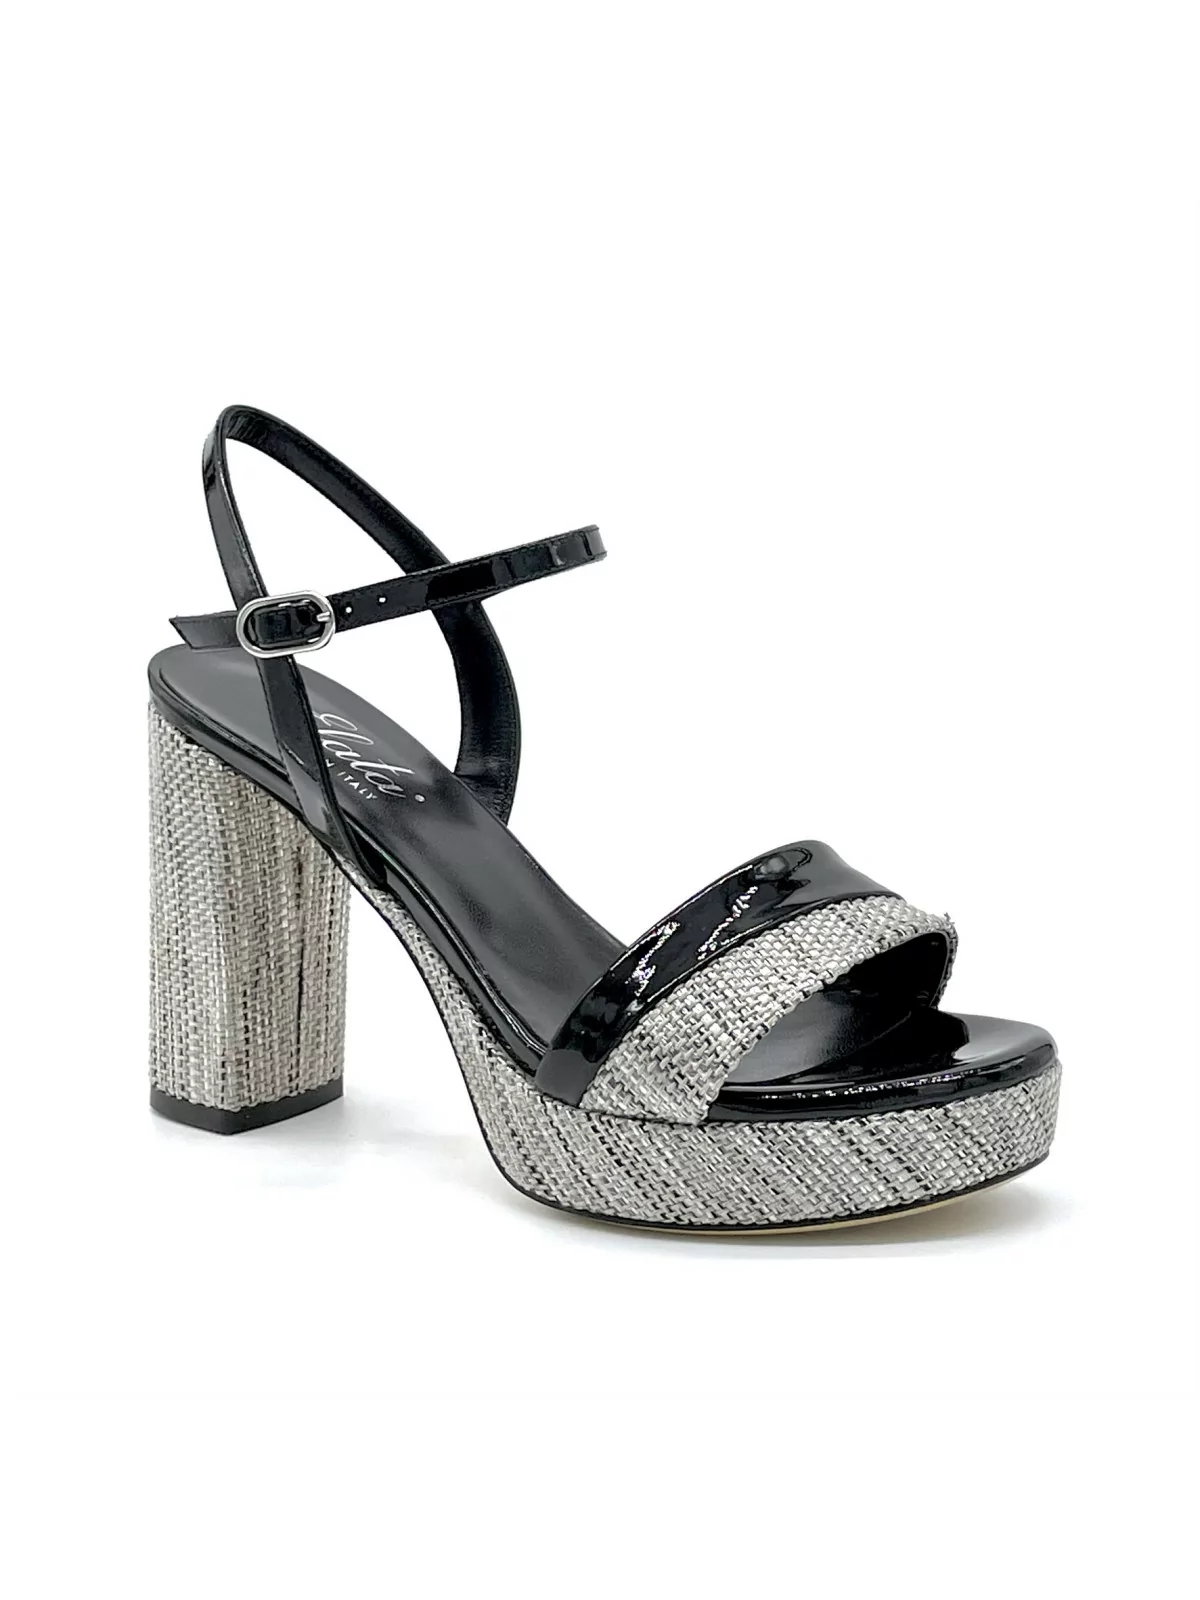 Black patent leather and black/beige raffia sandal. Leather lining. Leather sole